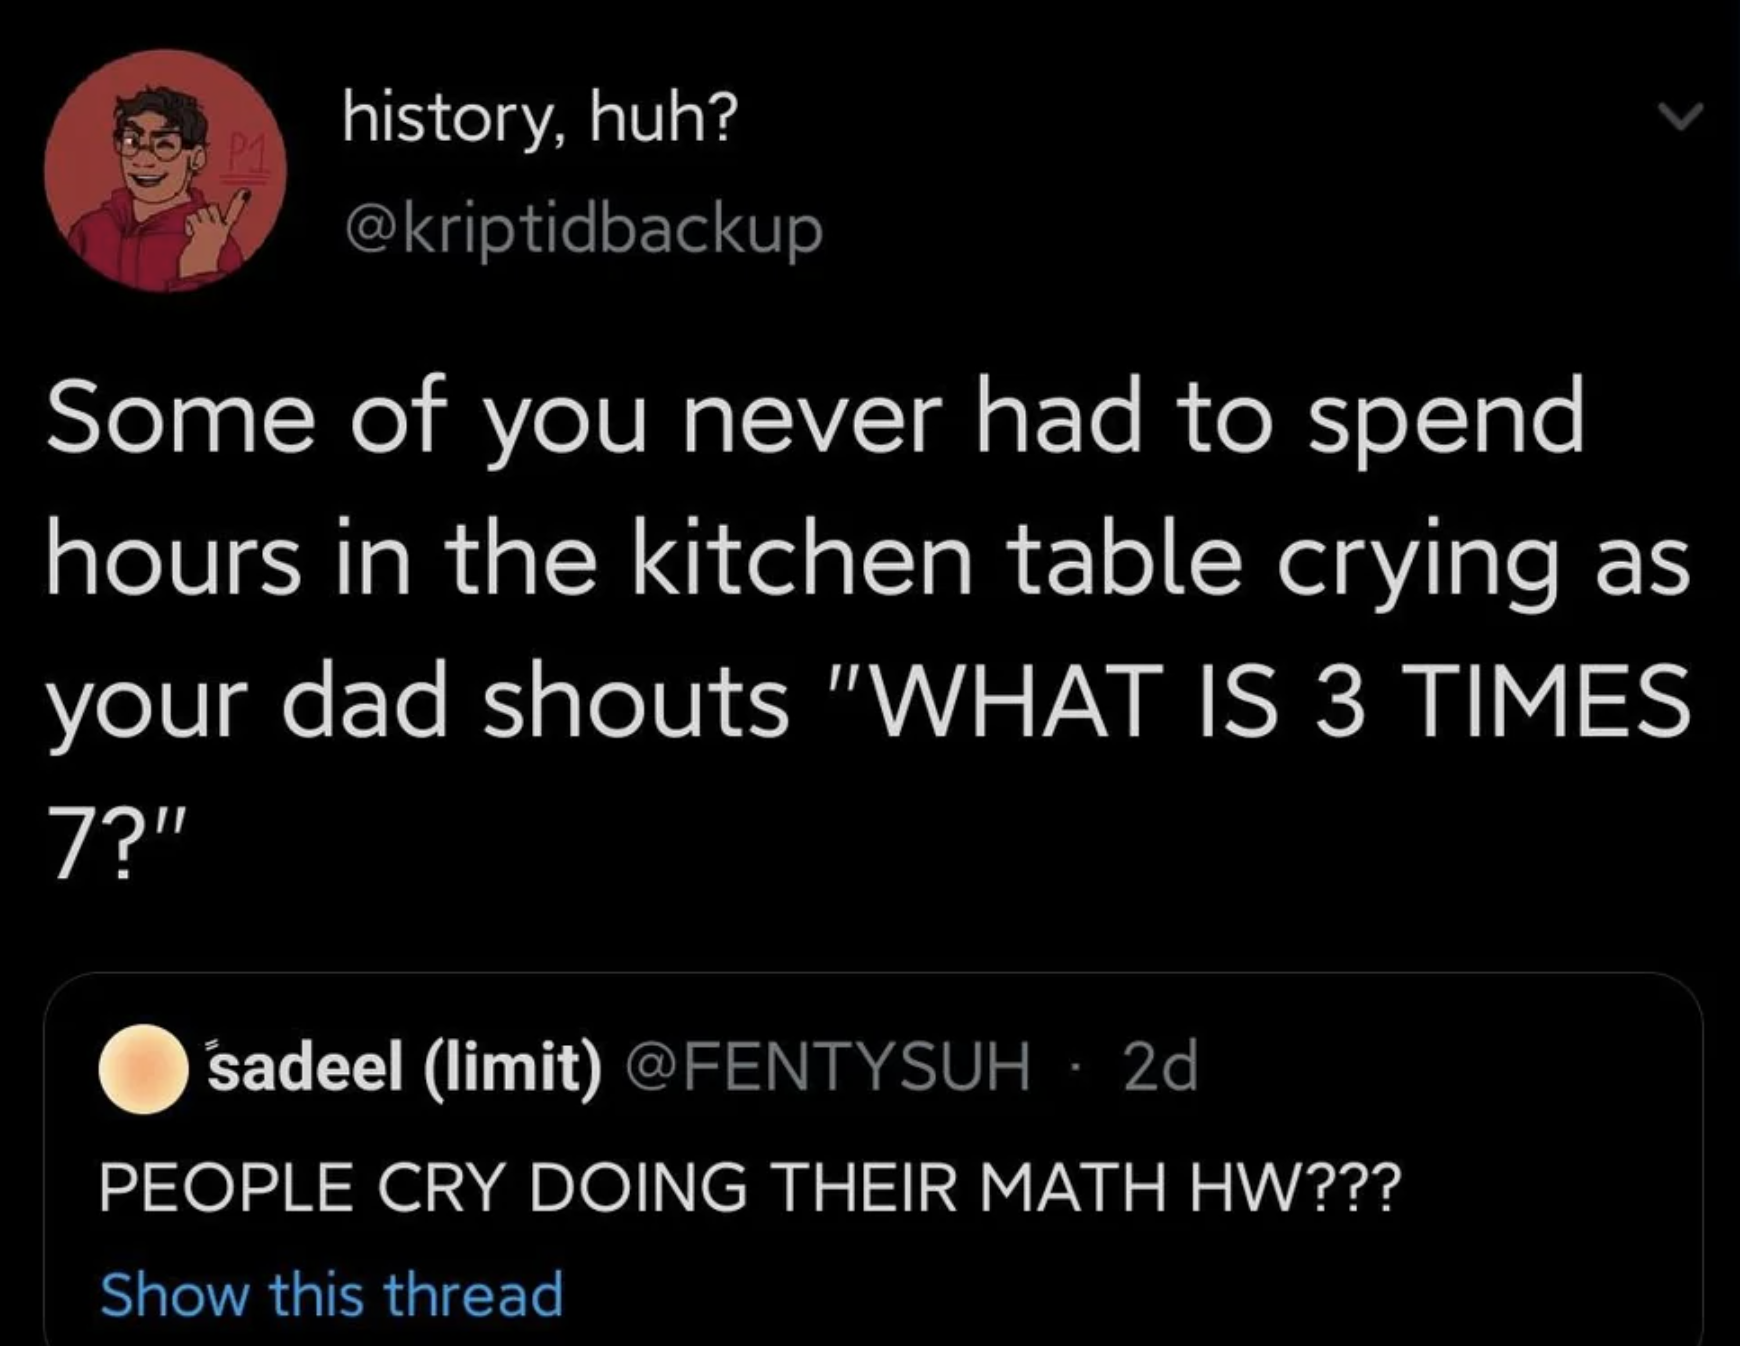 screenshot - history, huh? Some of you never had to spend hours in the kitchen table crying as your dad shouts "What Is 3 Times 7?" sadeel limit 2d People Cry Doing Their Math Hw??? Show this thread